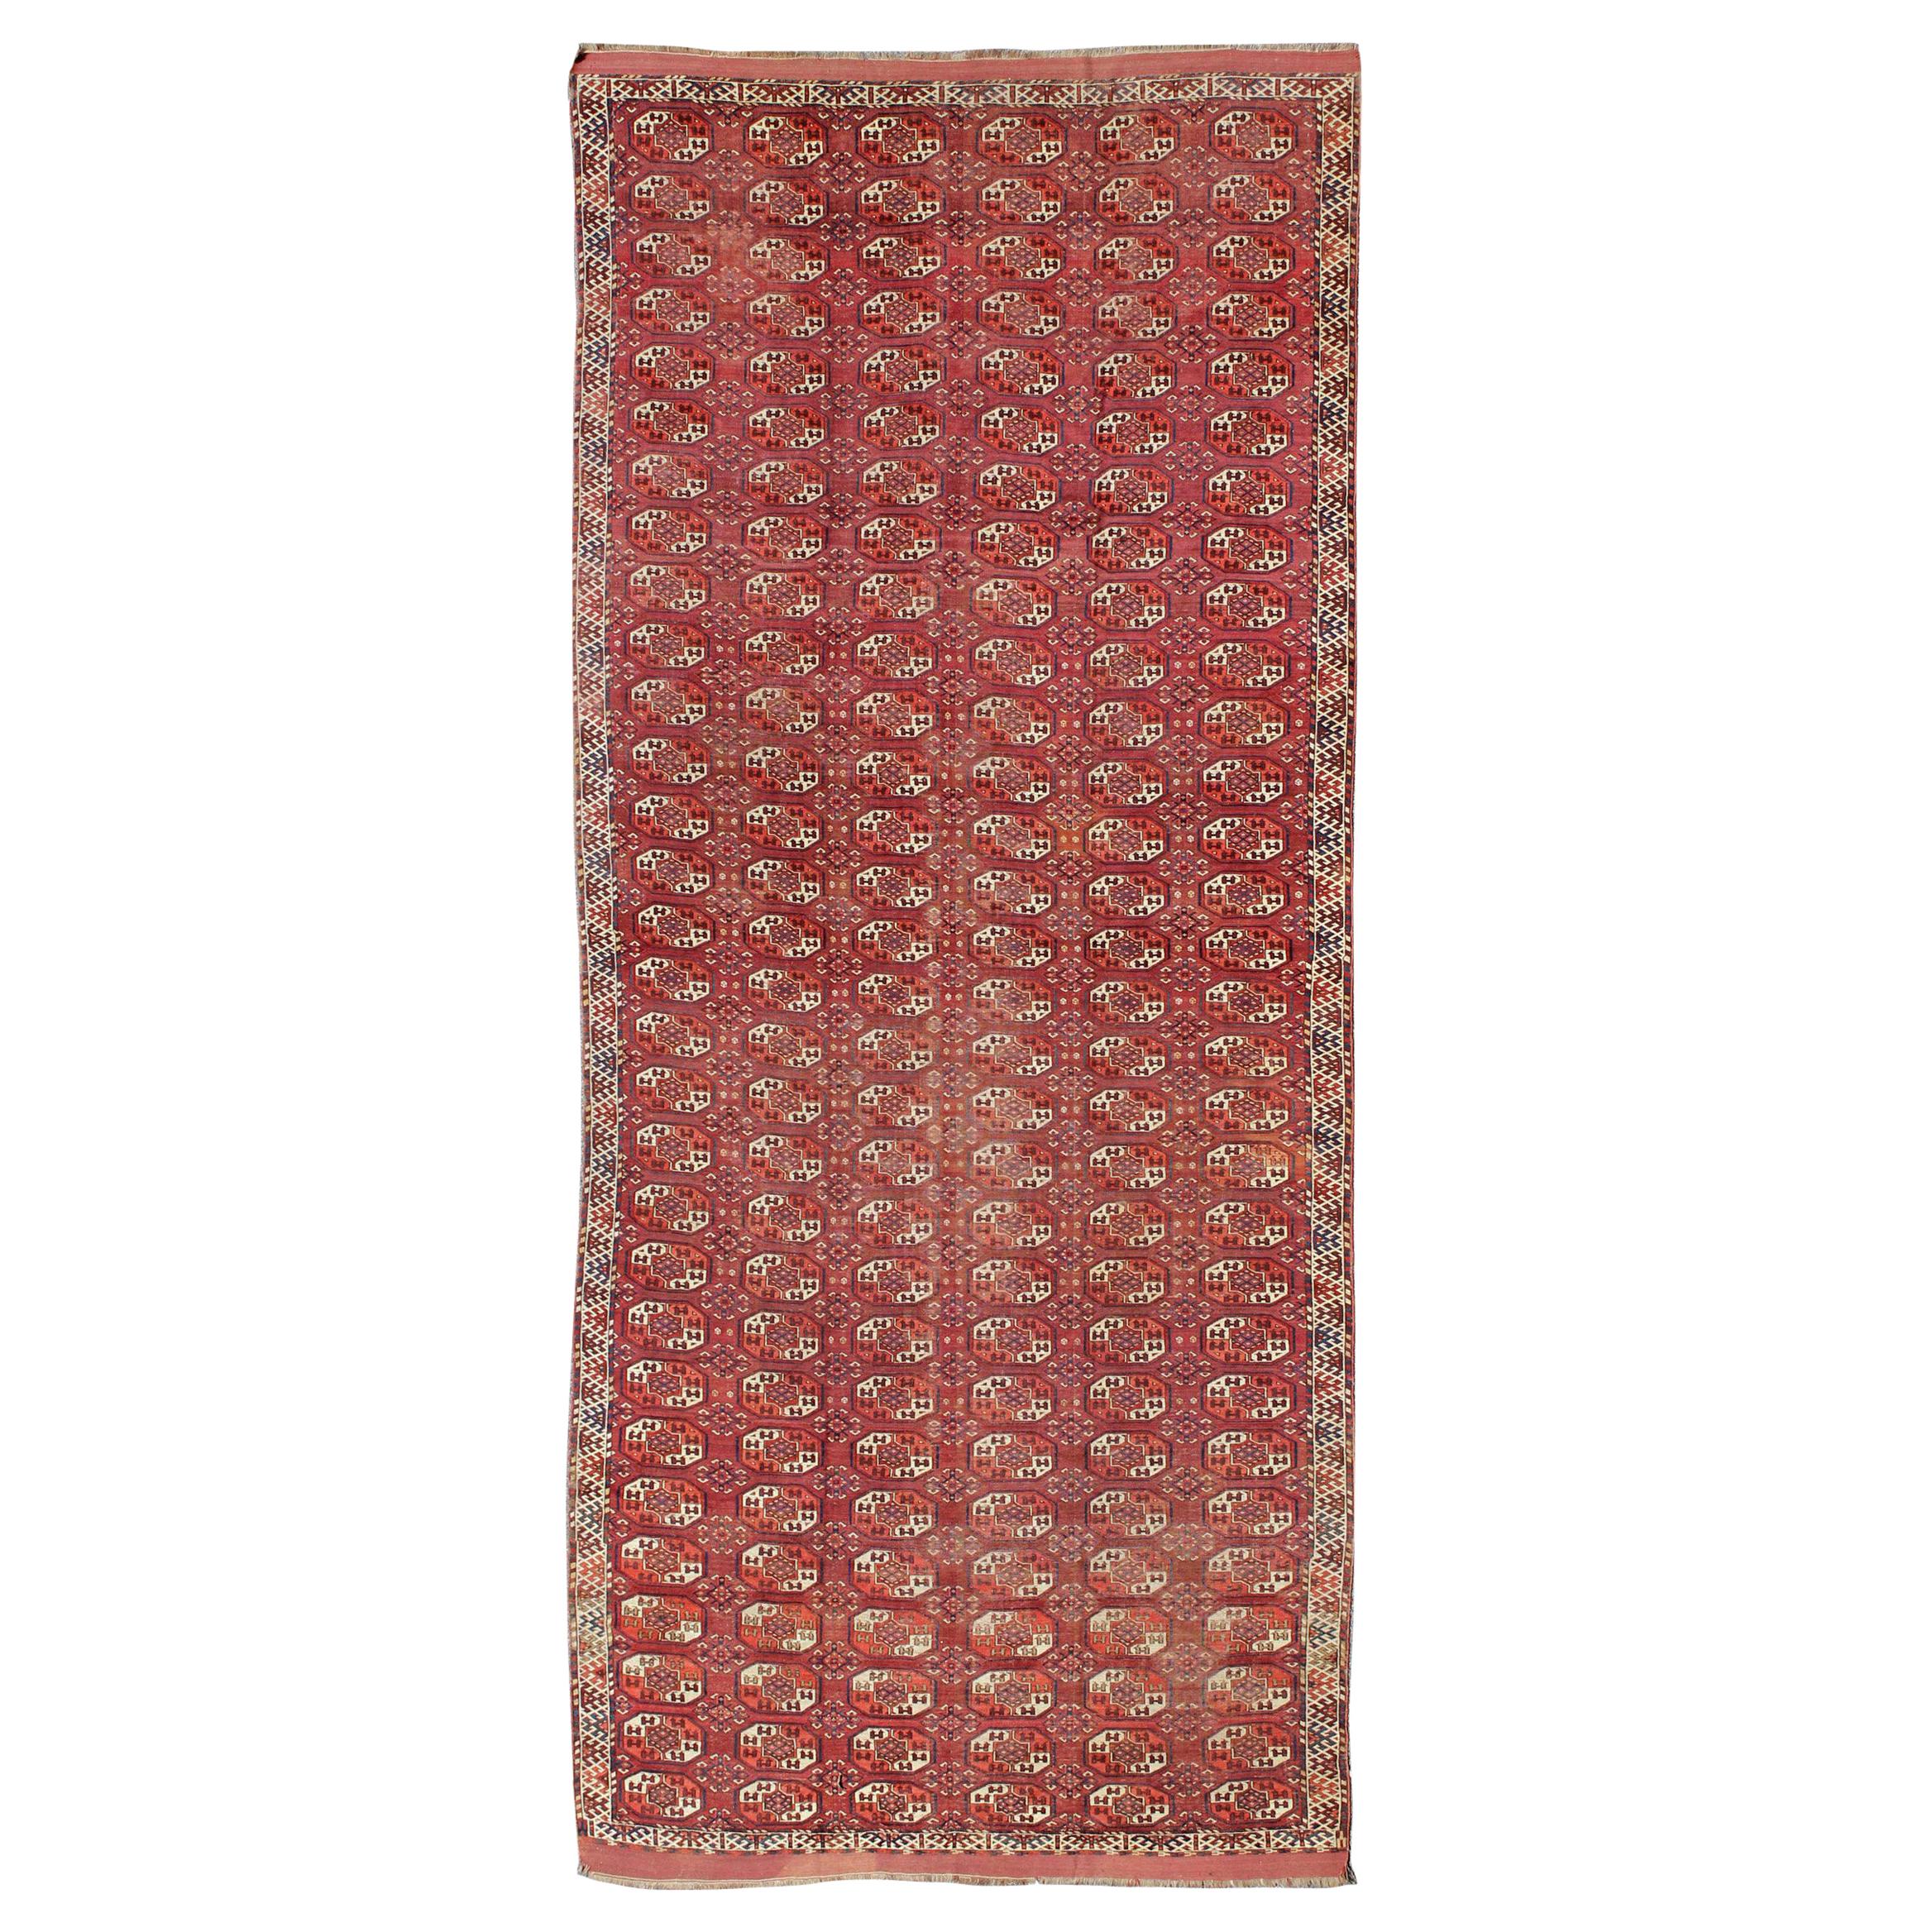 Extremely Large Antique Tekke Rug with Red Field and Repeating Medallion Design